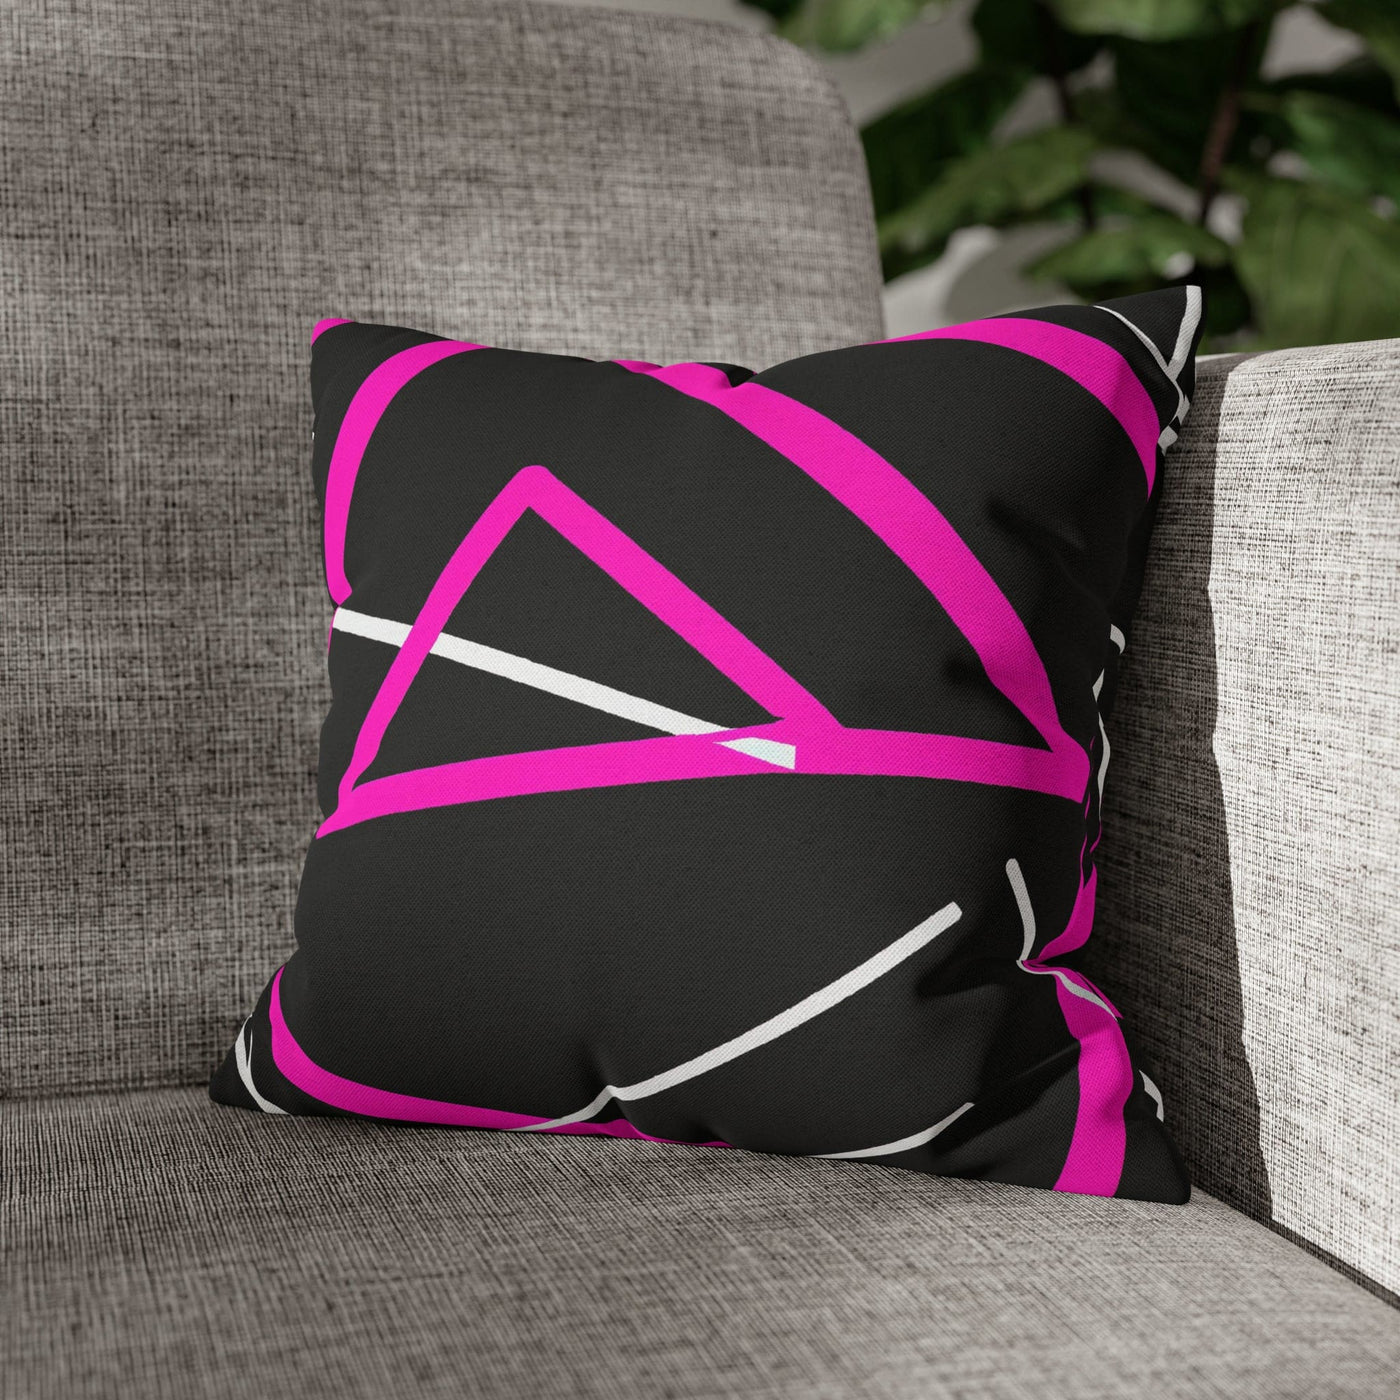 Decorative Throw Pillow Covers With Zipper - Set Of 2 Black And Pink Geometric